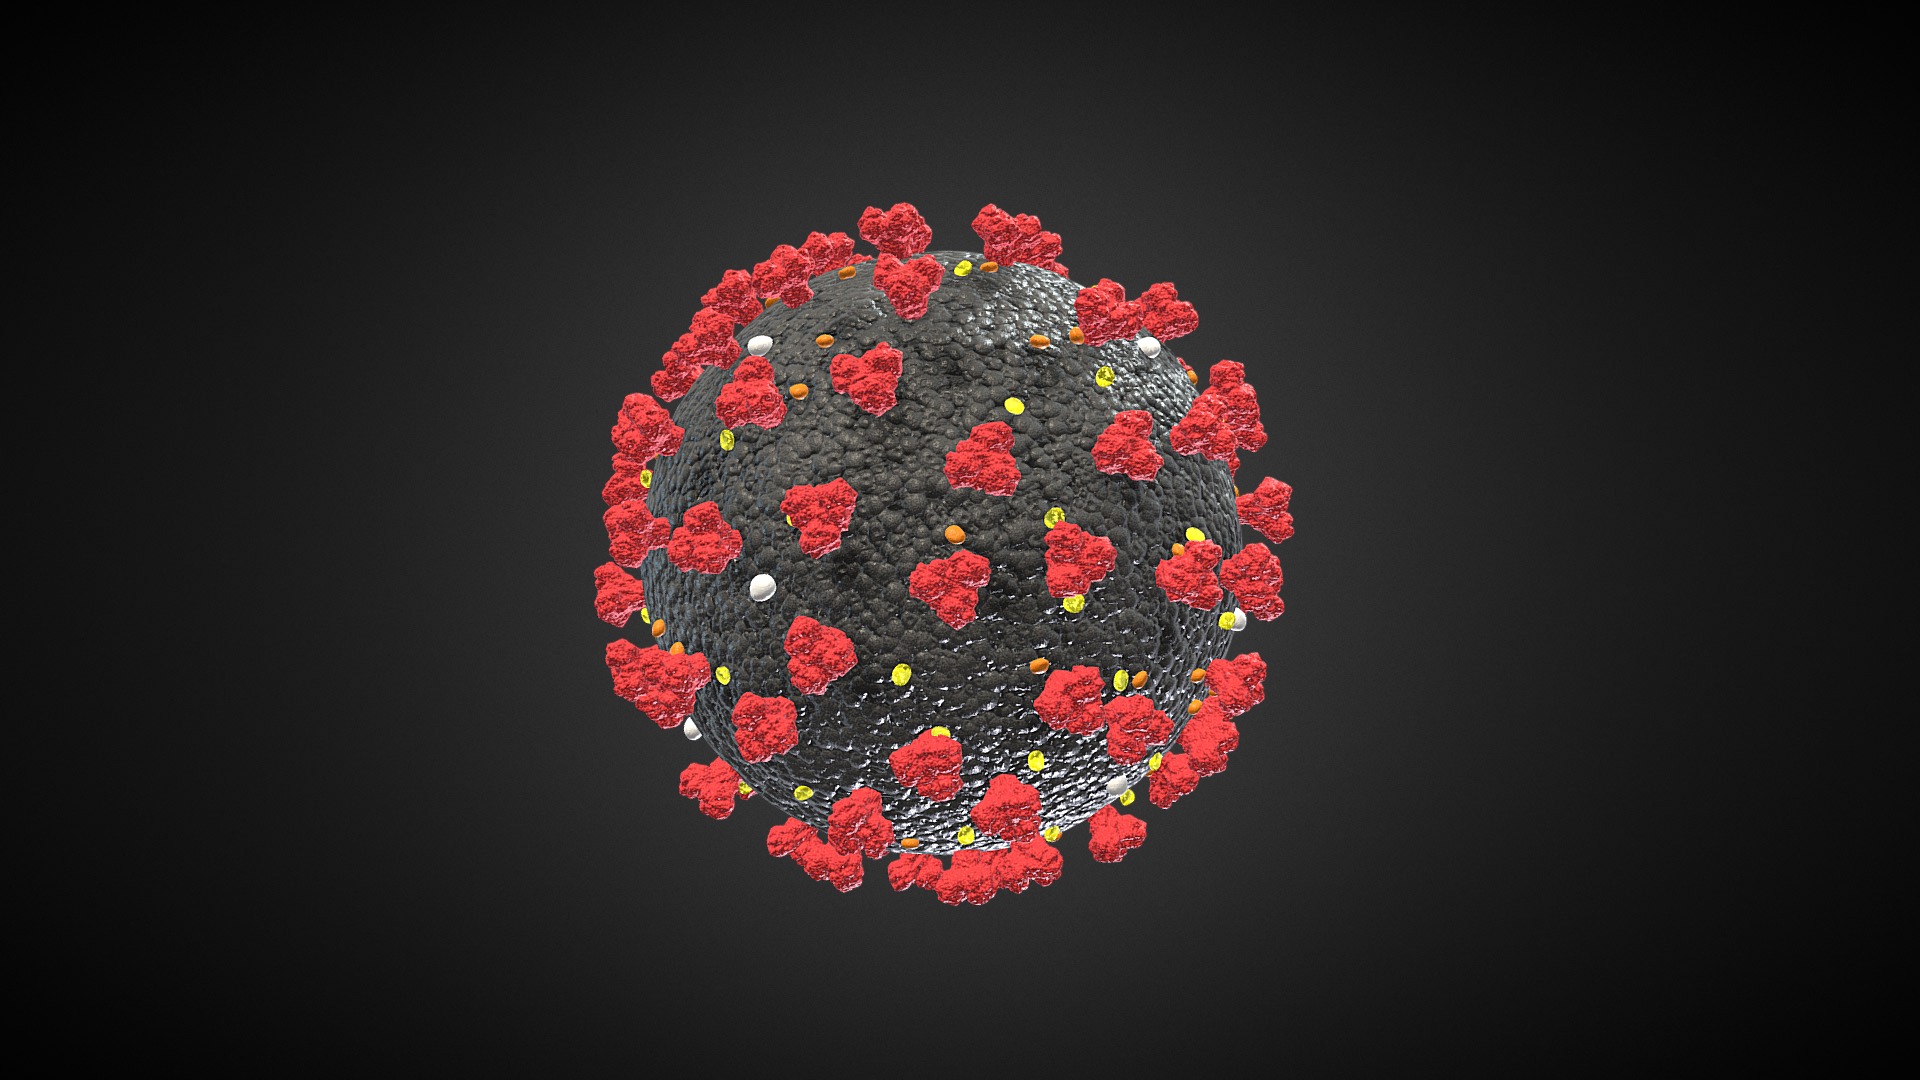 3D model Coronavirus - This is a 3D model of the Coronavirus. The 3D model is about a heart made of red and white flowers.